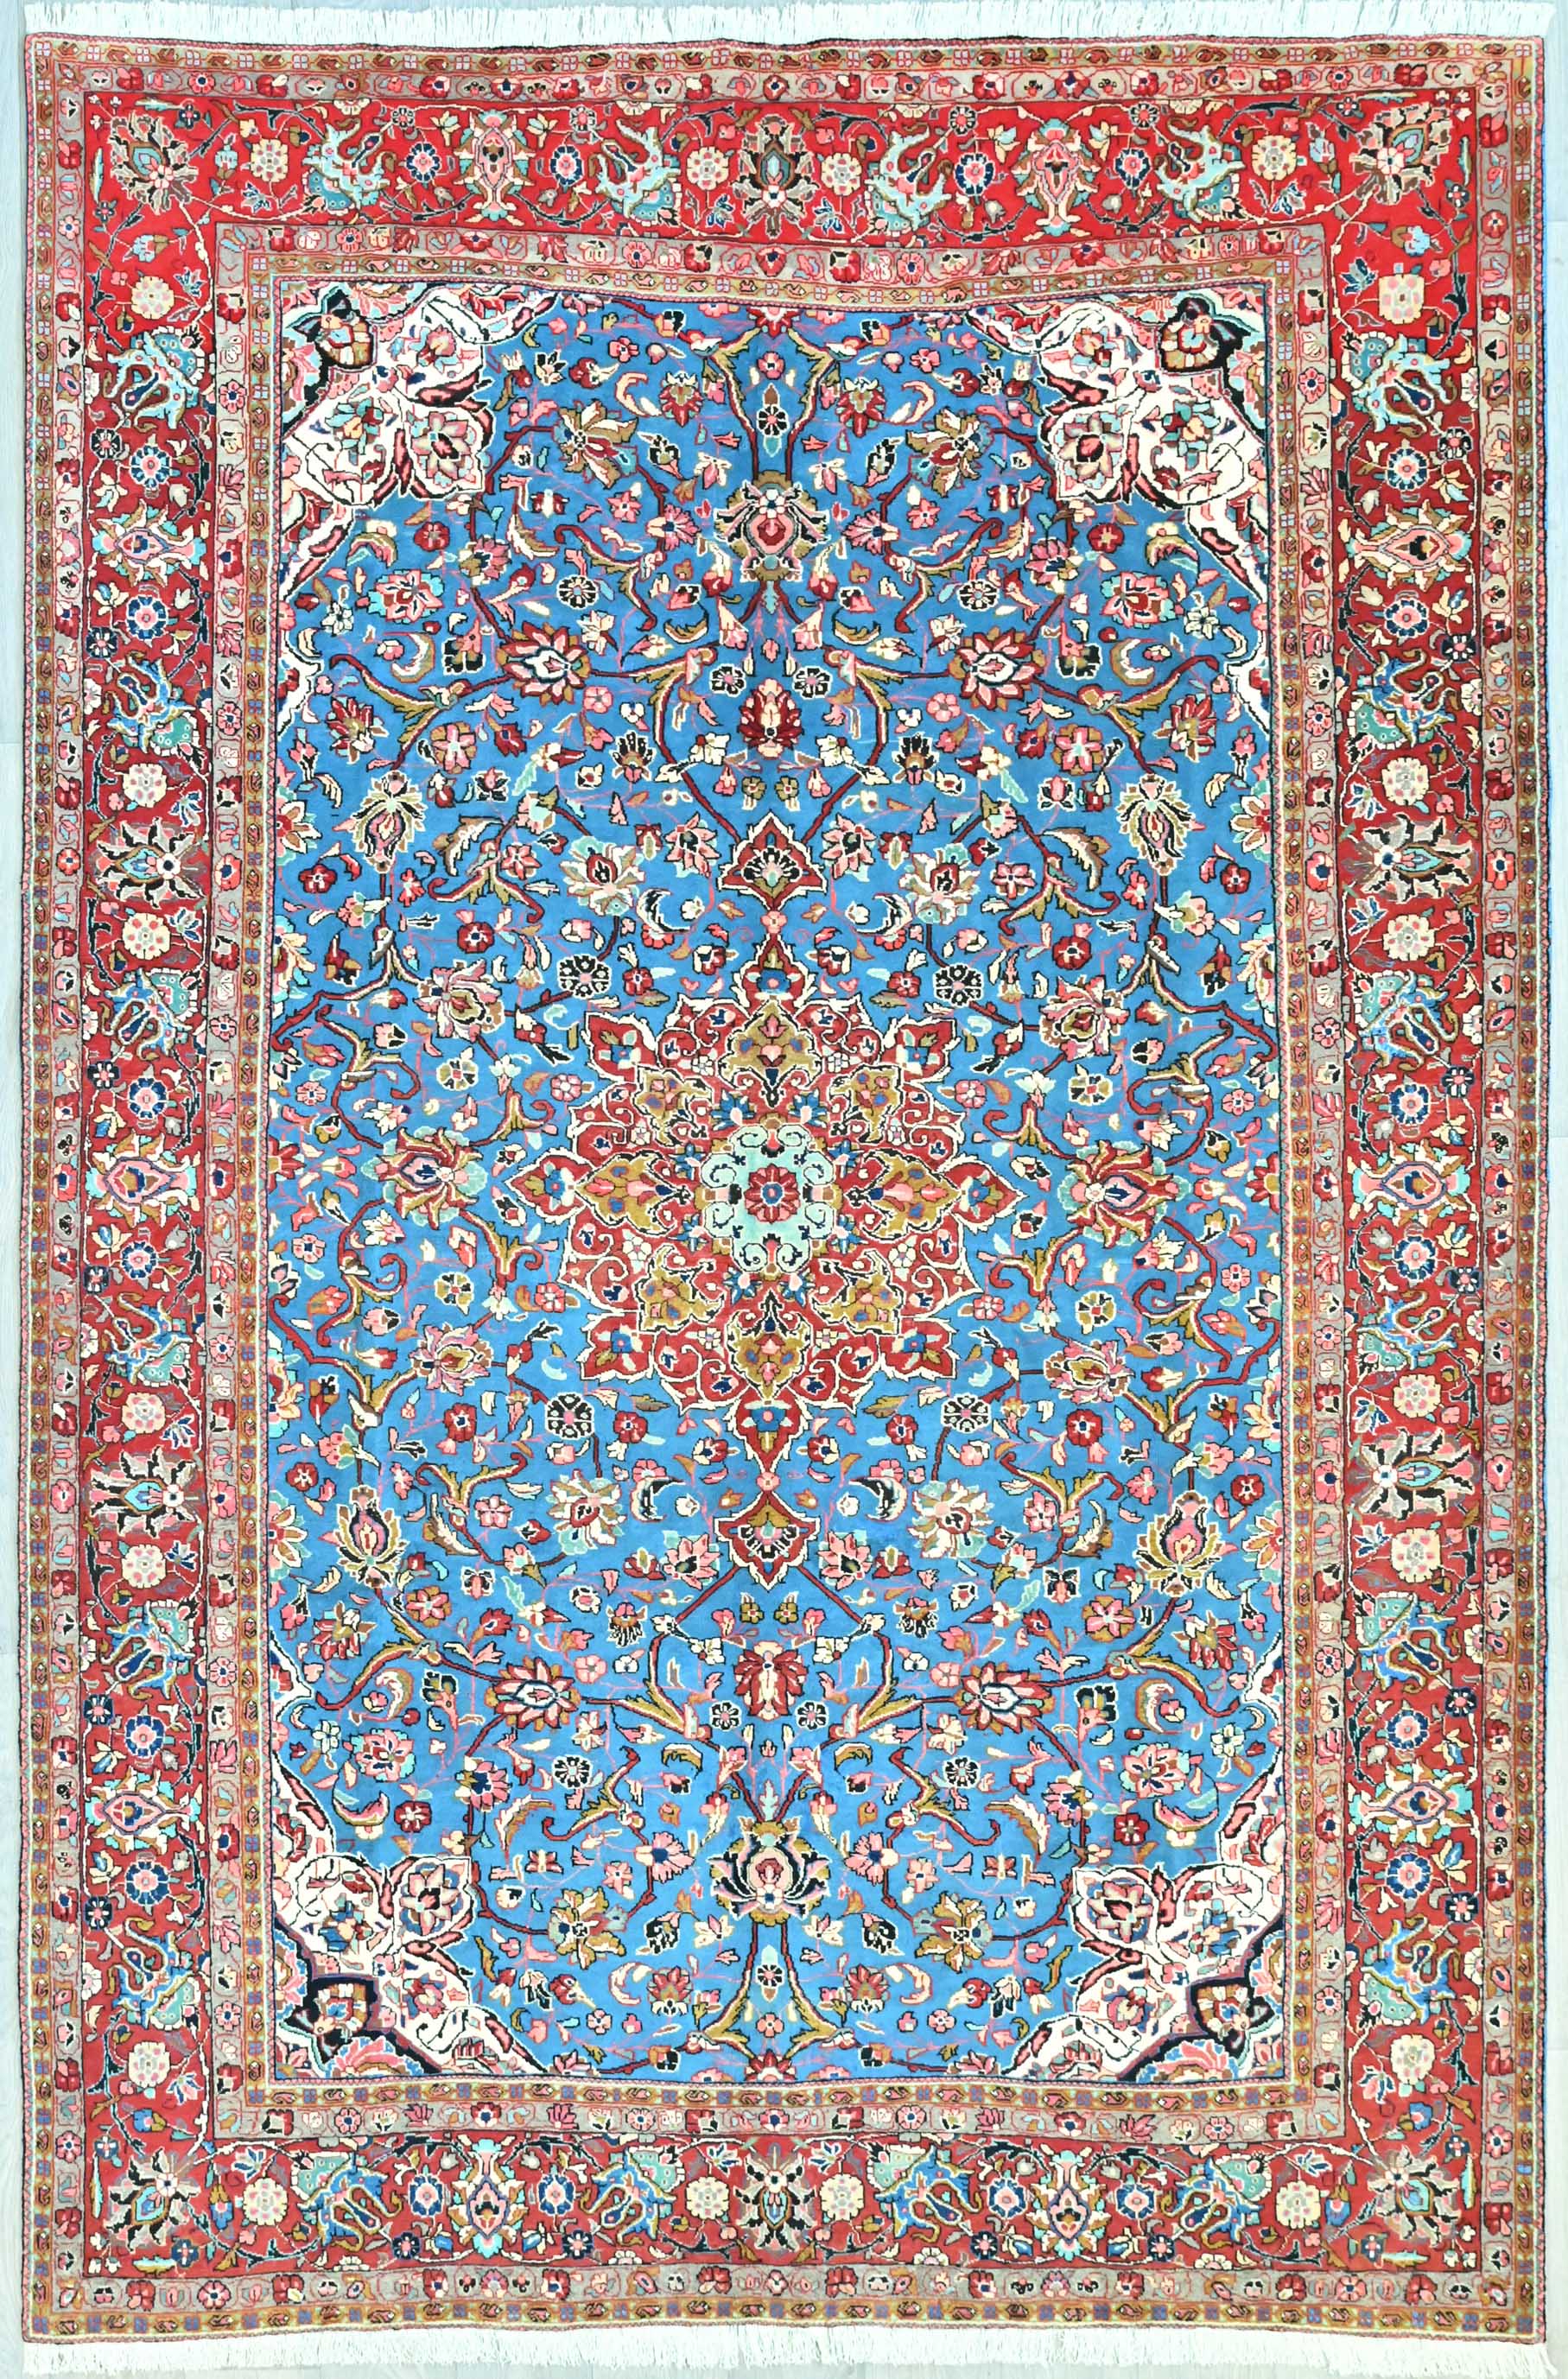 Handknotted Pure Wool Persian Tabriz Rug w/Blue and Deep Red Tones - (332H x 220W)